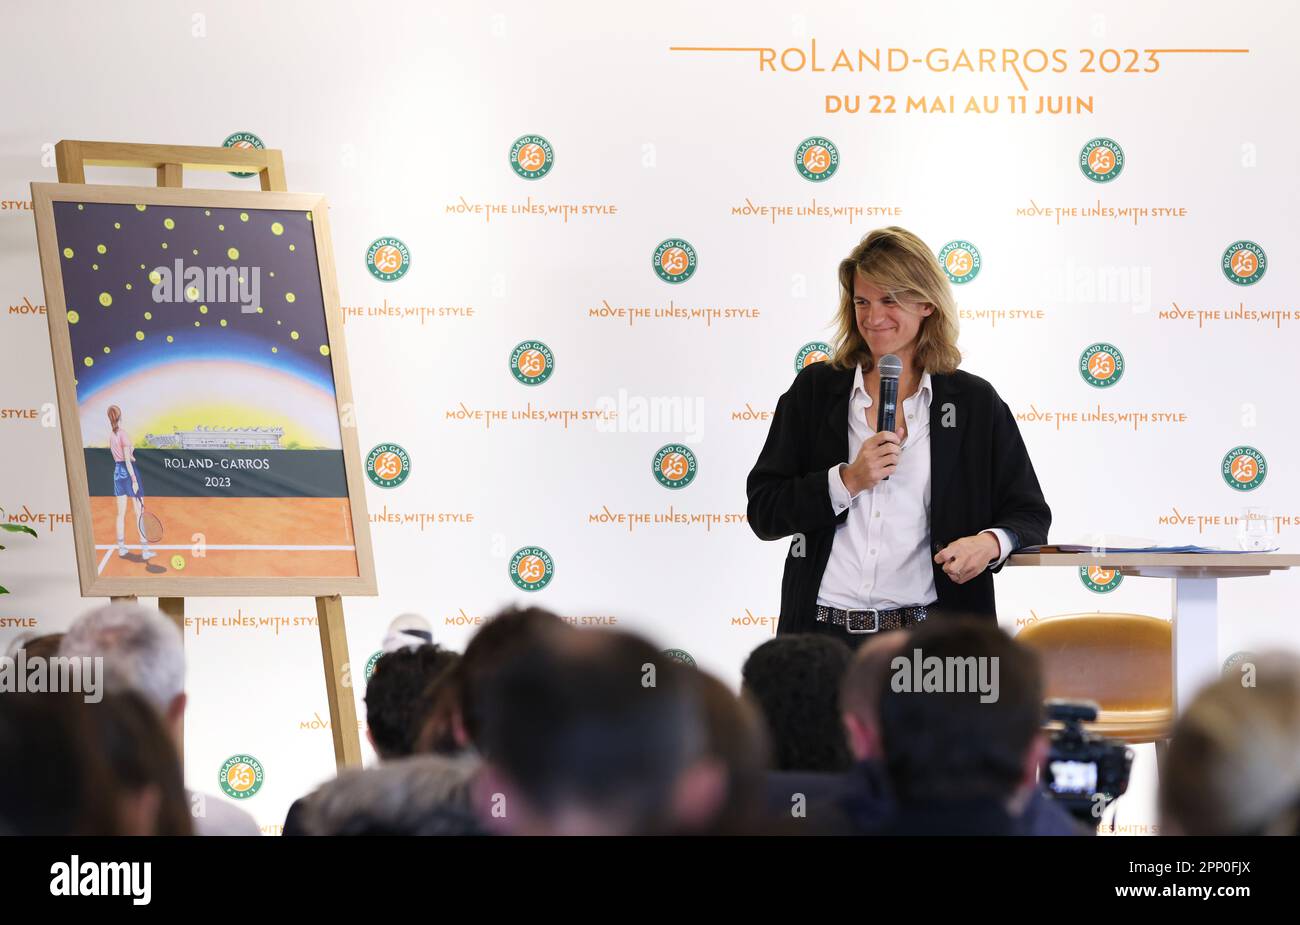 Paris, France. 21st Apr, 2023. Roland-Garros Open tennis tournament's director Amelie Mauresmo addresses a press conference presenting the 2023 edition of the Roland Garros Grand Slam tennis tournament at the Roland Garros stadium, western Paris, France, April 21, 2023. Credit: Gao Jing/Xinhua/Alamy Live News Stock Photo